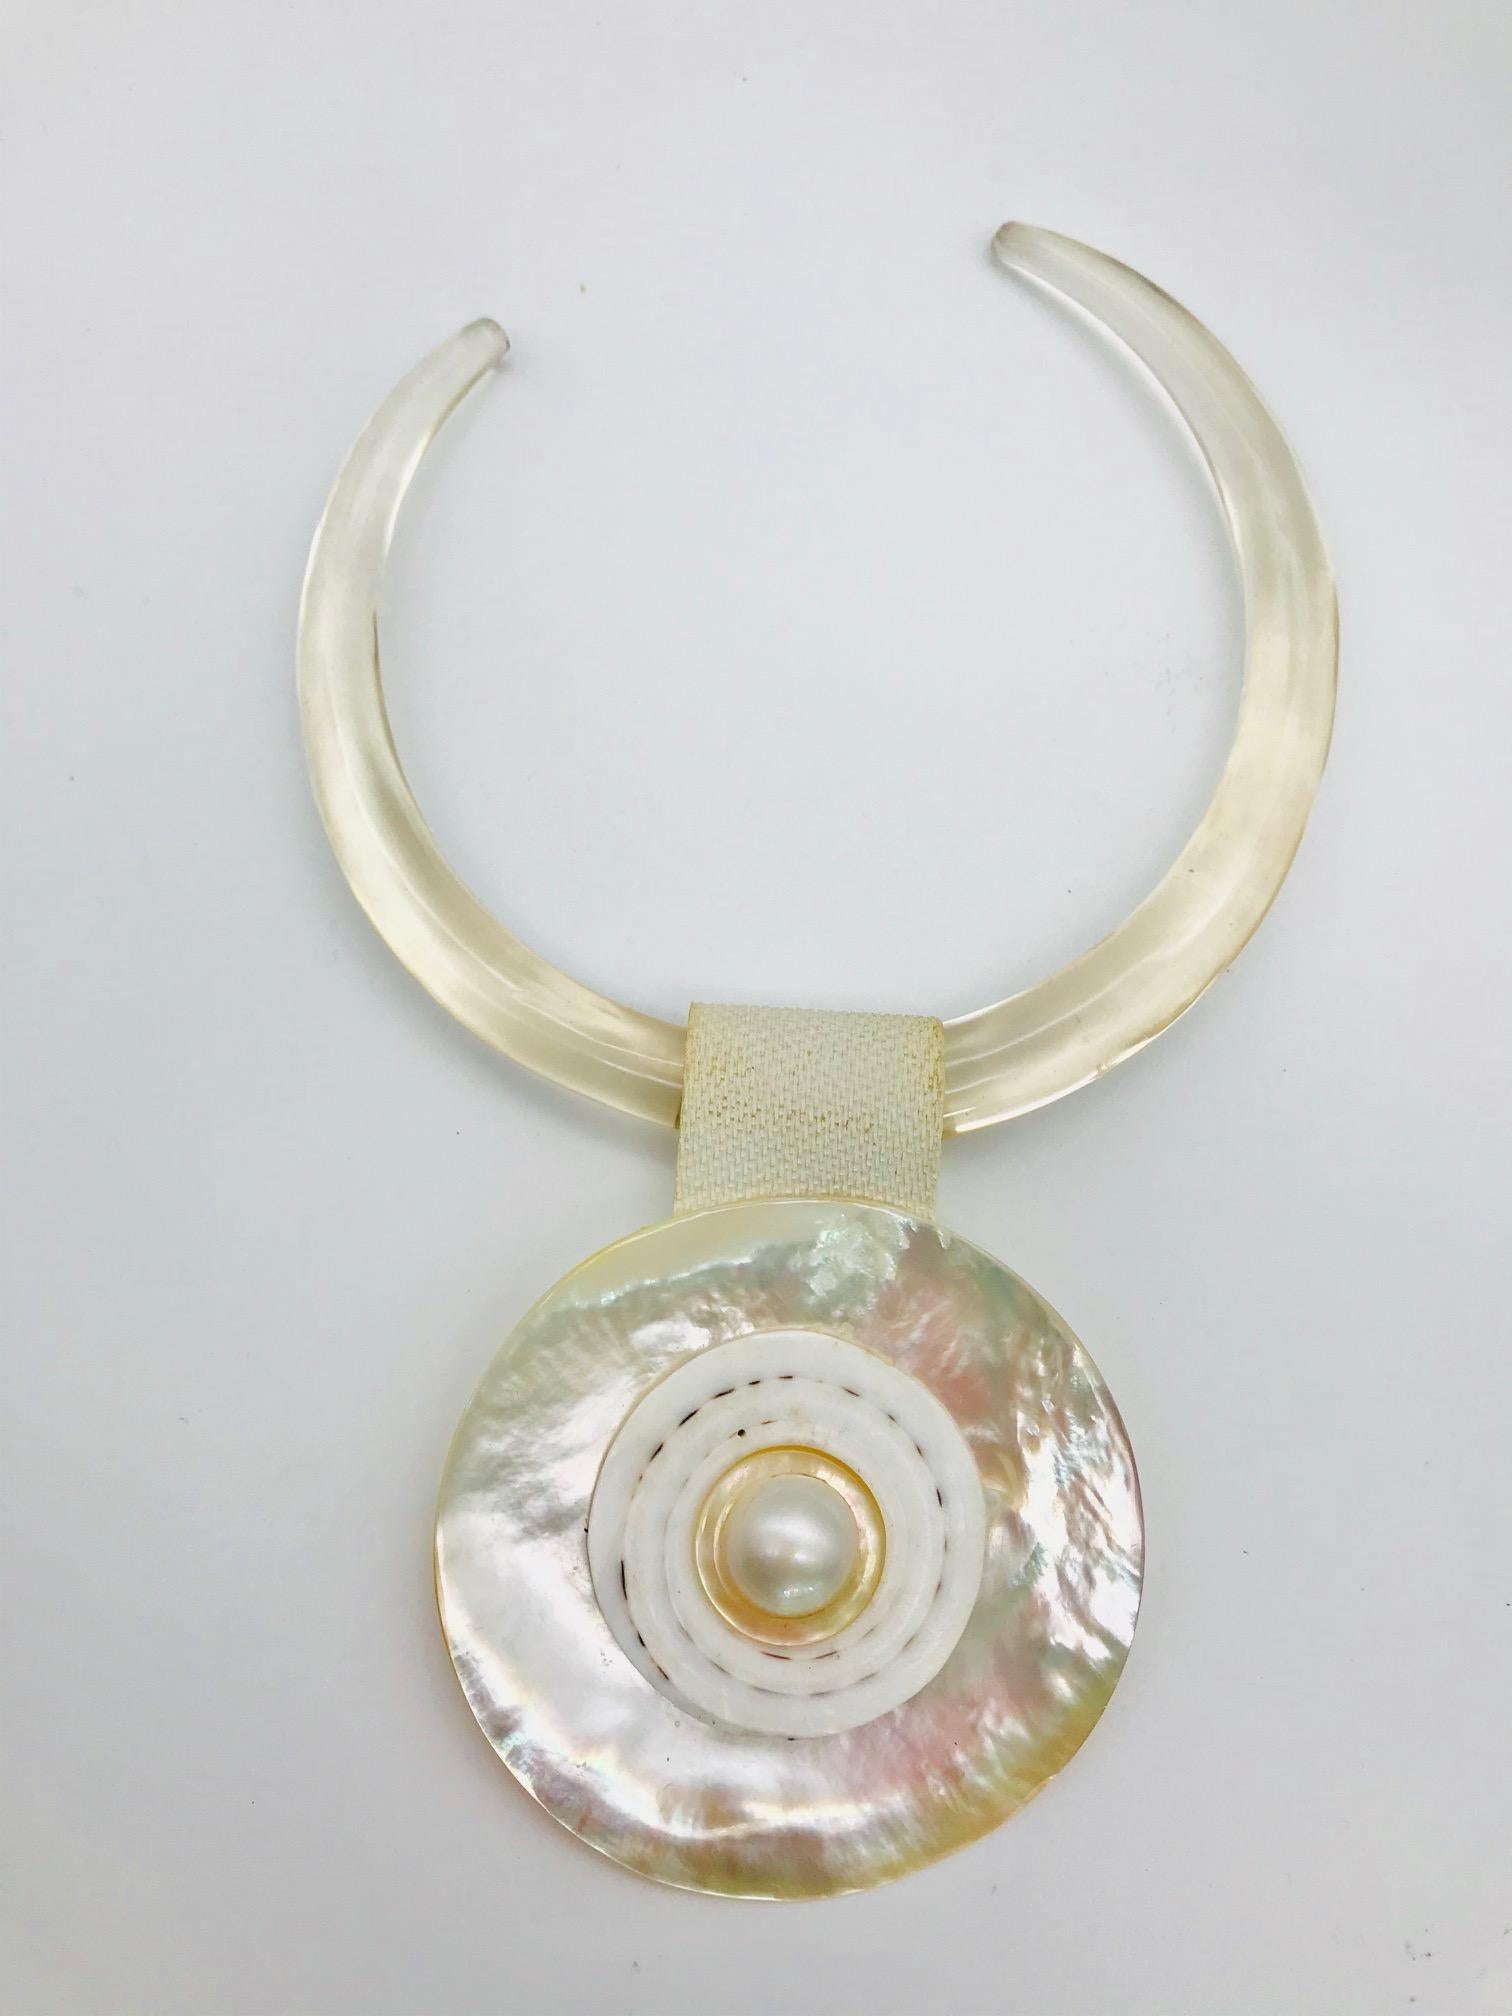 This pendant consists of a large  Mabe Pearl framed in French Deco ring   on top of a white Mother of pearl with exceptional iridescence. Pendant  is attached to the clear resin choker by a white rubber strap. The image of this Mabe pearl is in the